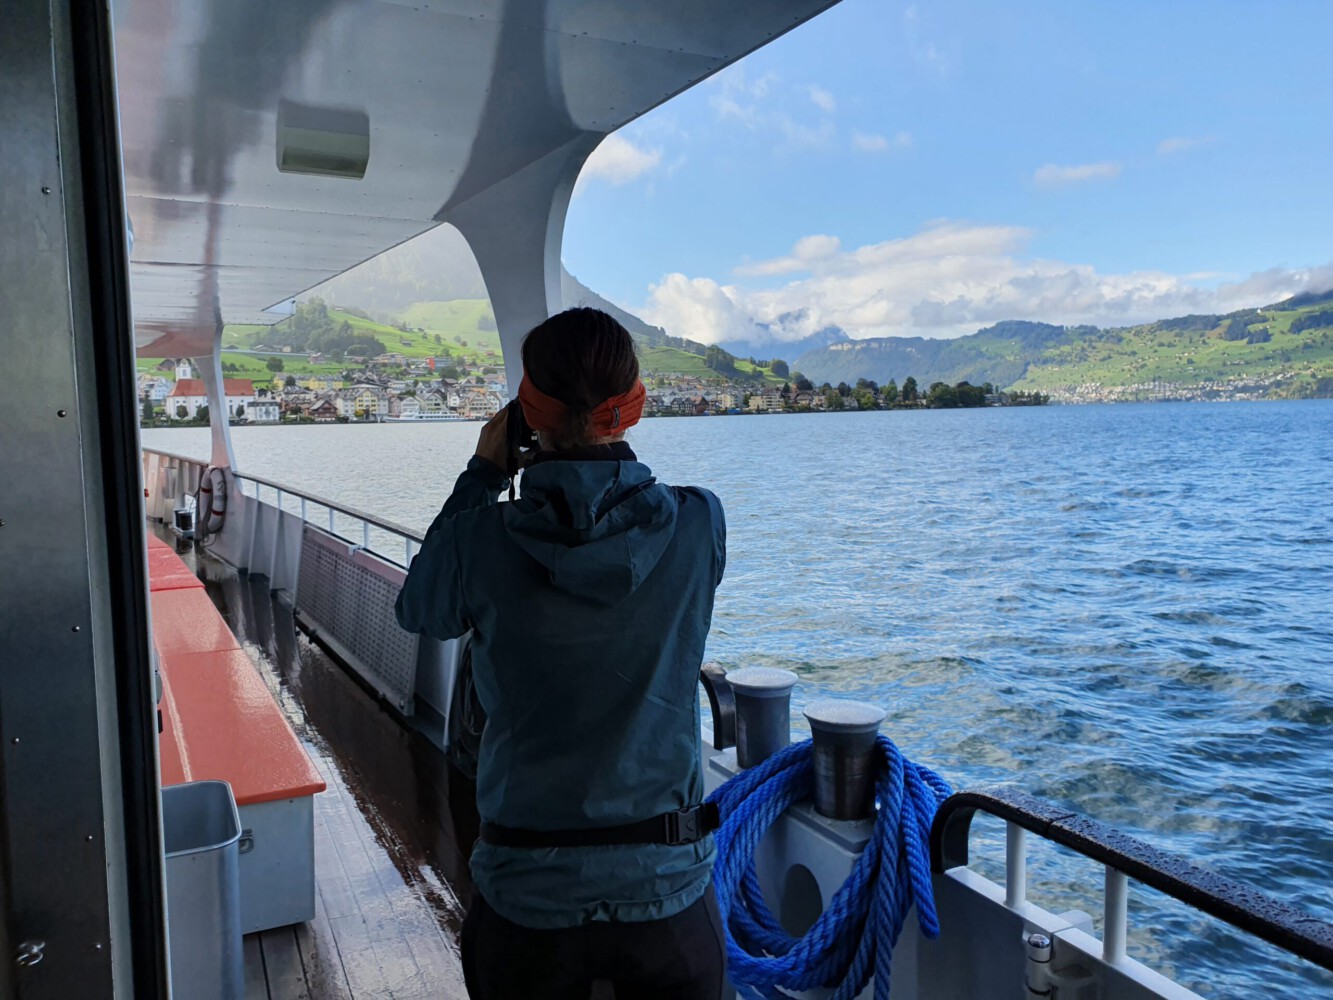 Alina taking photos on the boat while arriving in Beckenried.